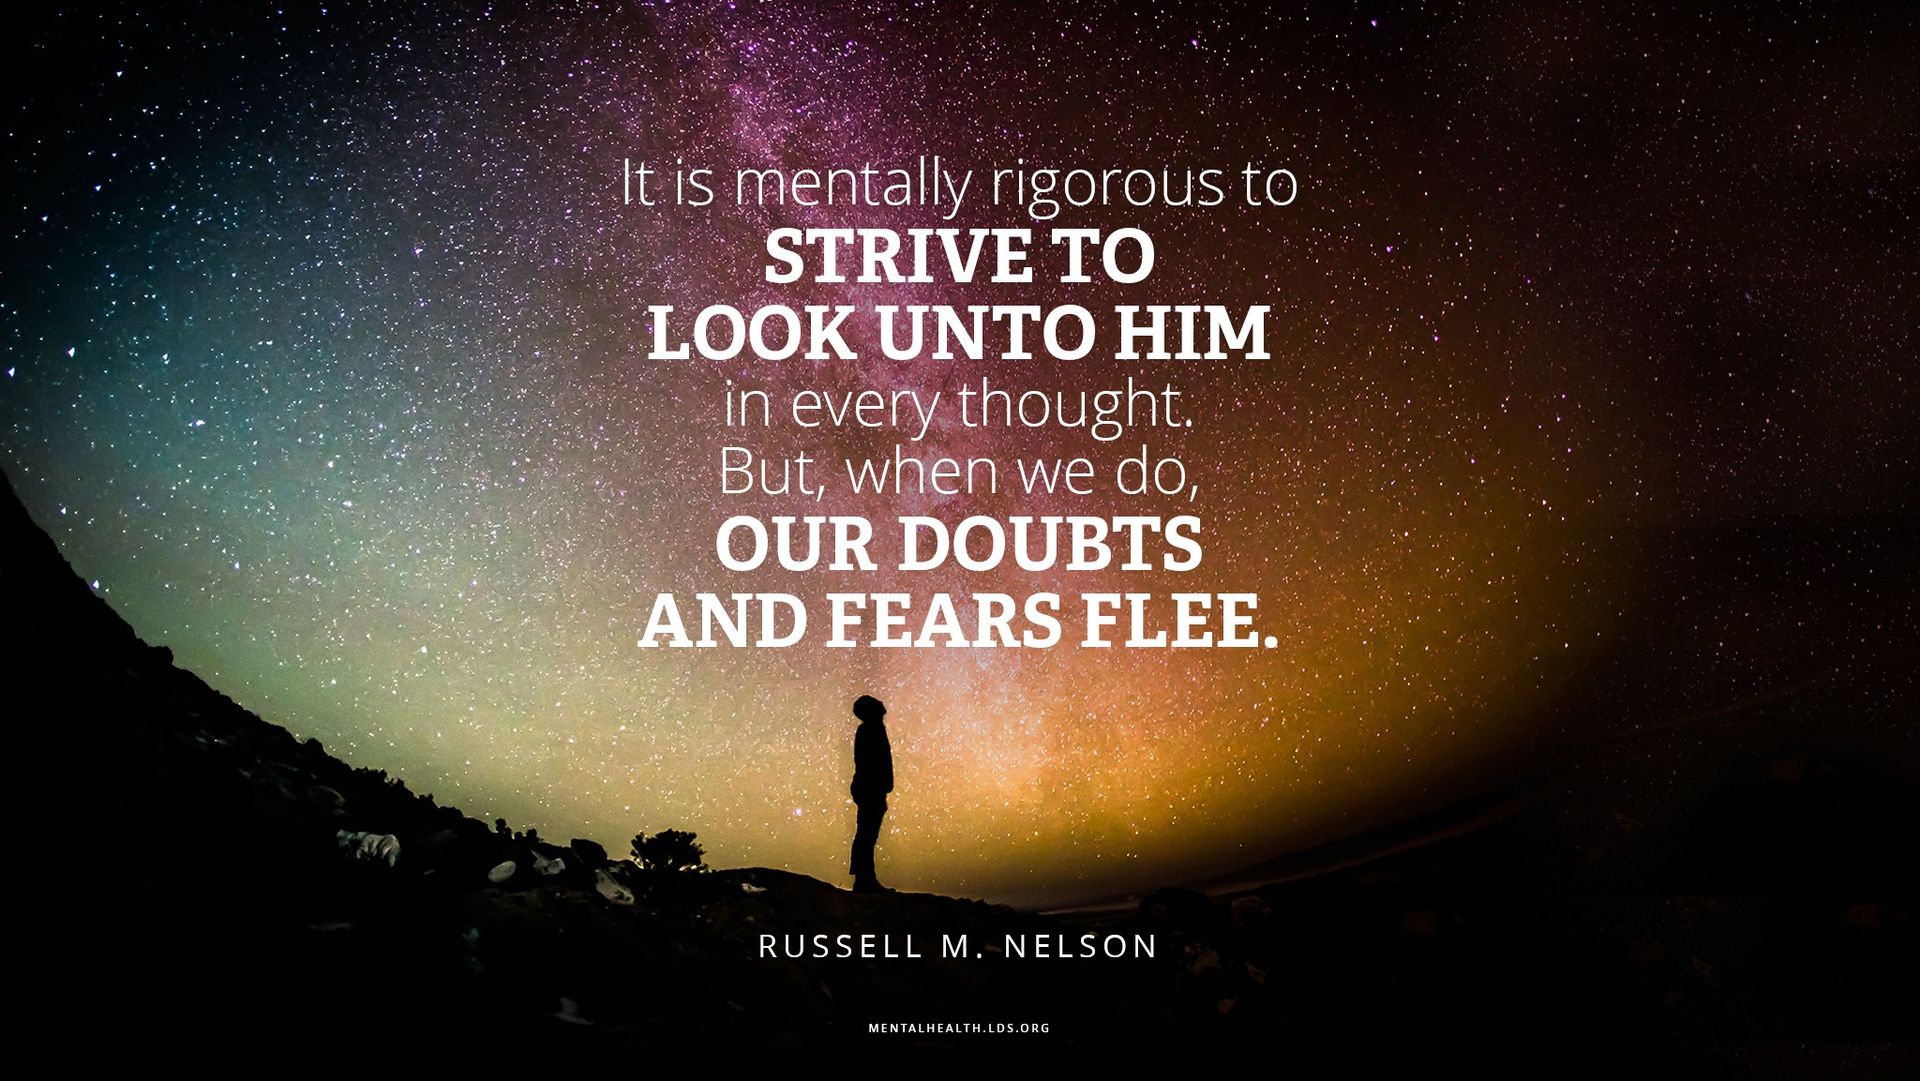 “It is mentally rigorous to strive to look unto Him in every thought. But, when we do, our doubts and fears flee.”—President Russell M. Nelson, “Drawing the Power of Jesus Christ into Our Lives” © undefined ipCode 1.